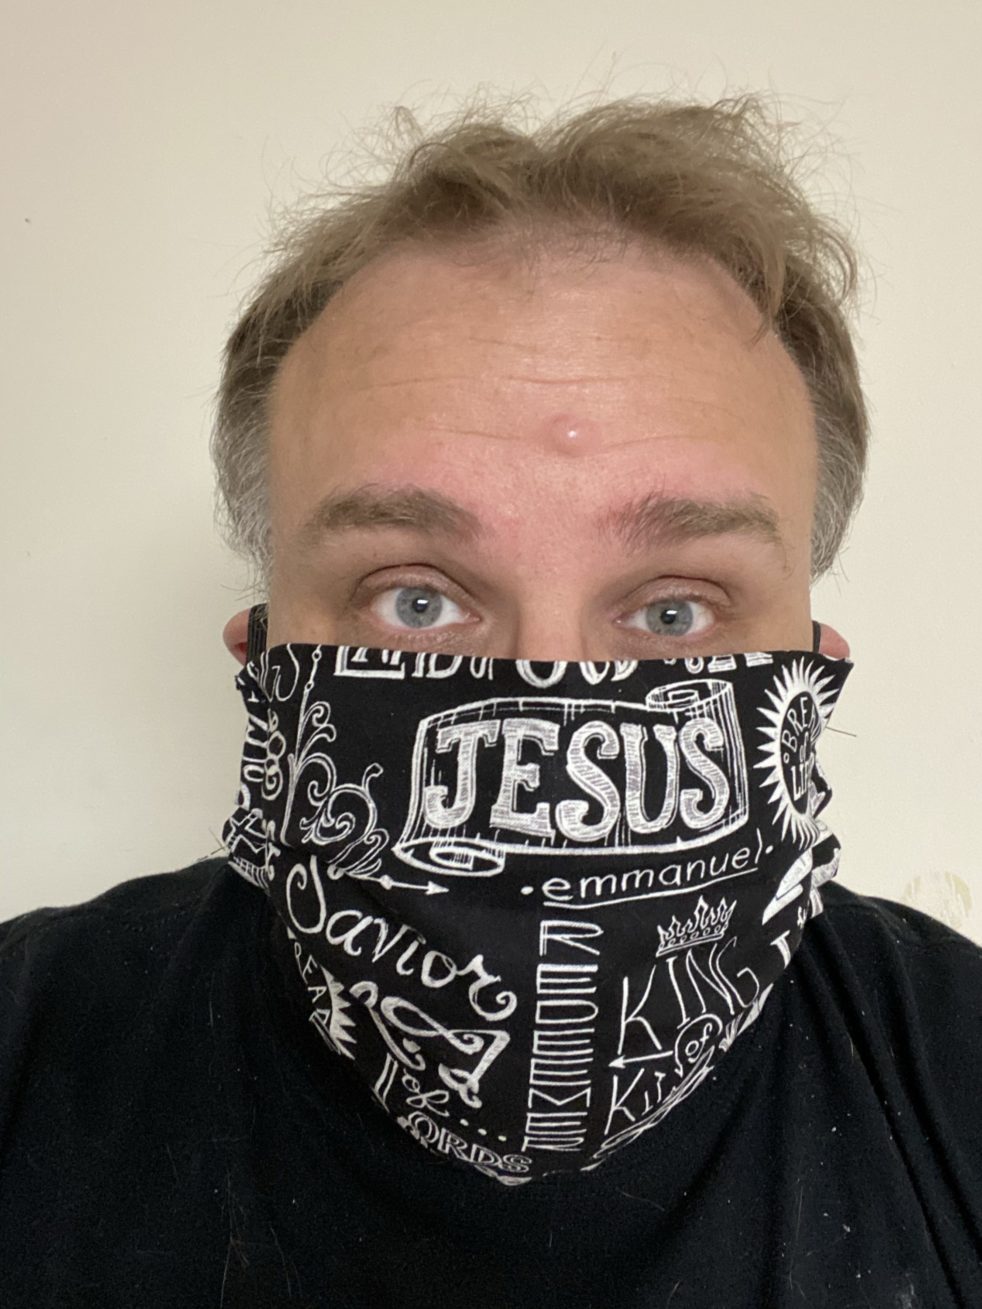 Jesus Mask I made - Wearing a face mask is not showing fear - It actually is the opposite. It shows your concern for others around you! #FaceMask